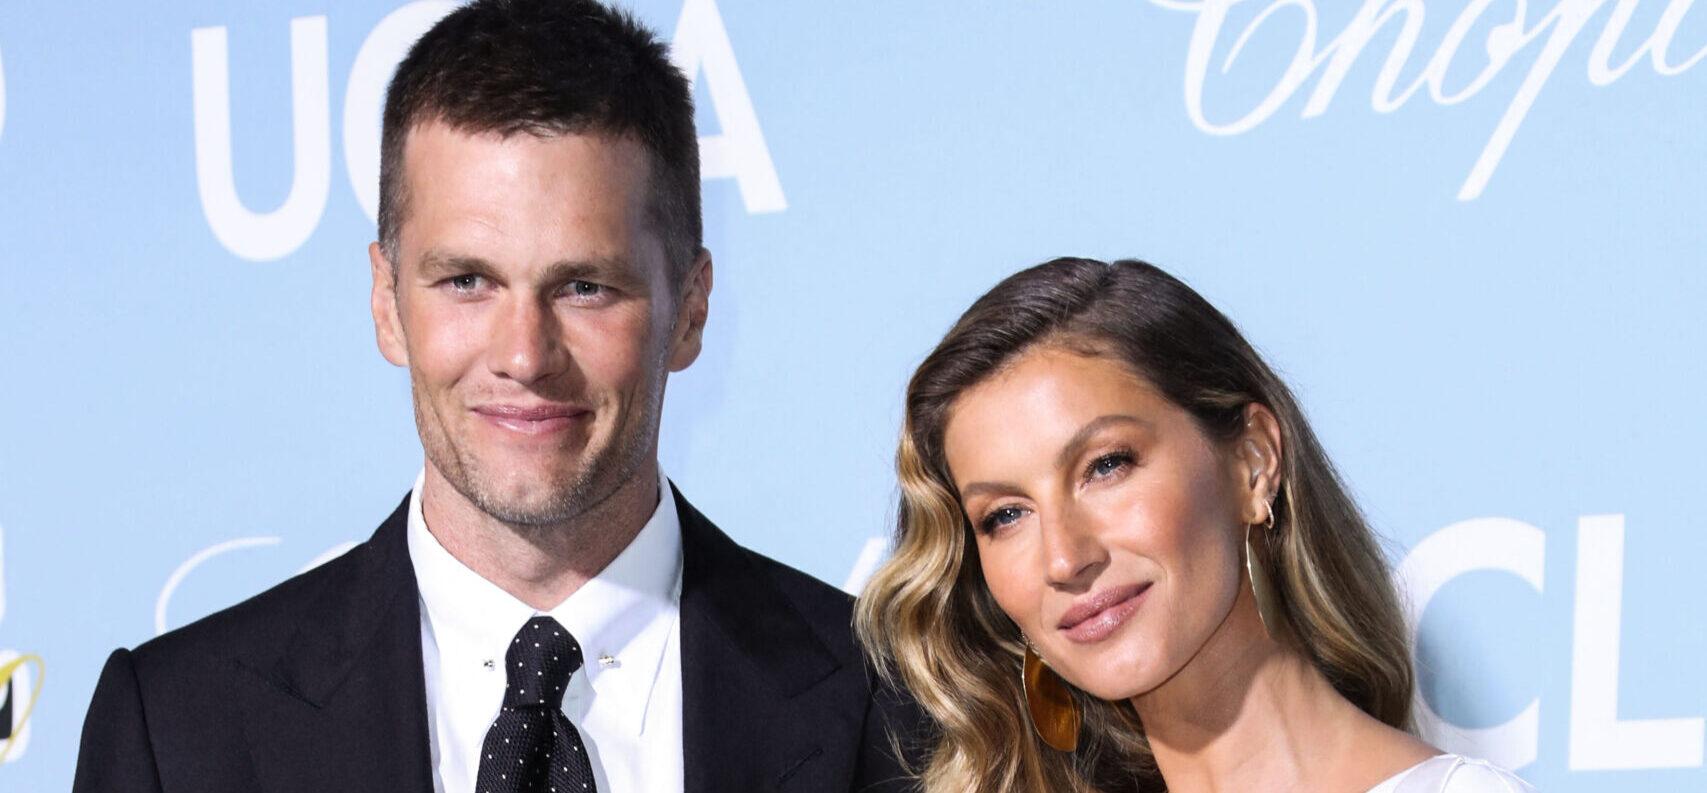 Tom Brady Is Reportedly Trying To ‘Find The Good’ In Gisele Bundchen’s New Man